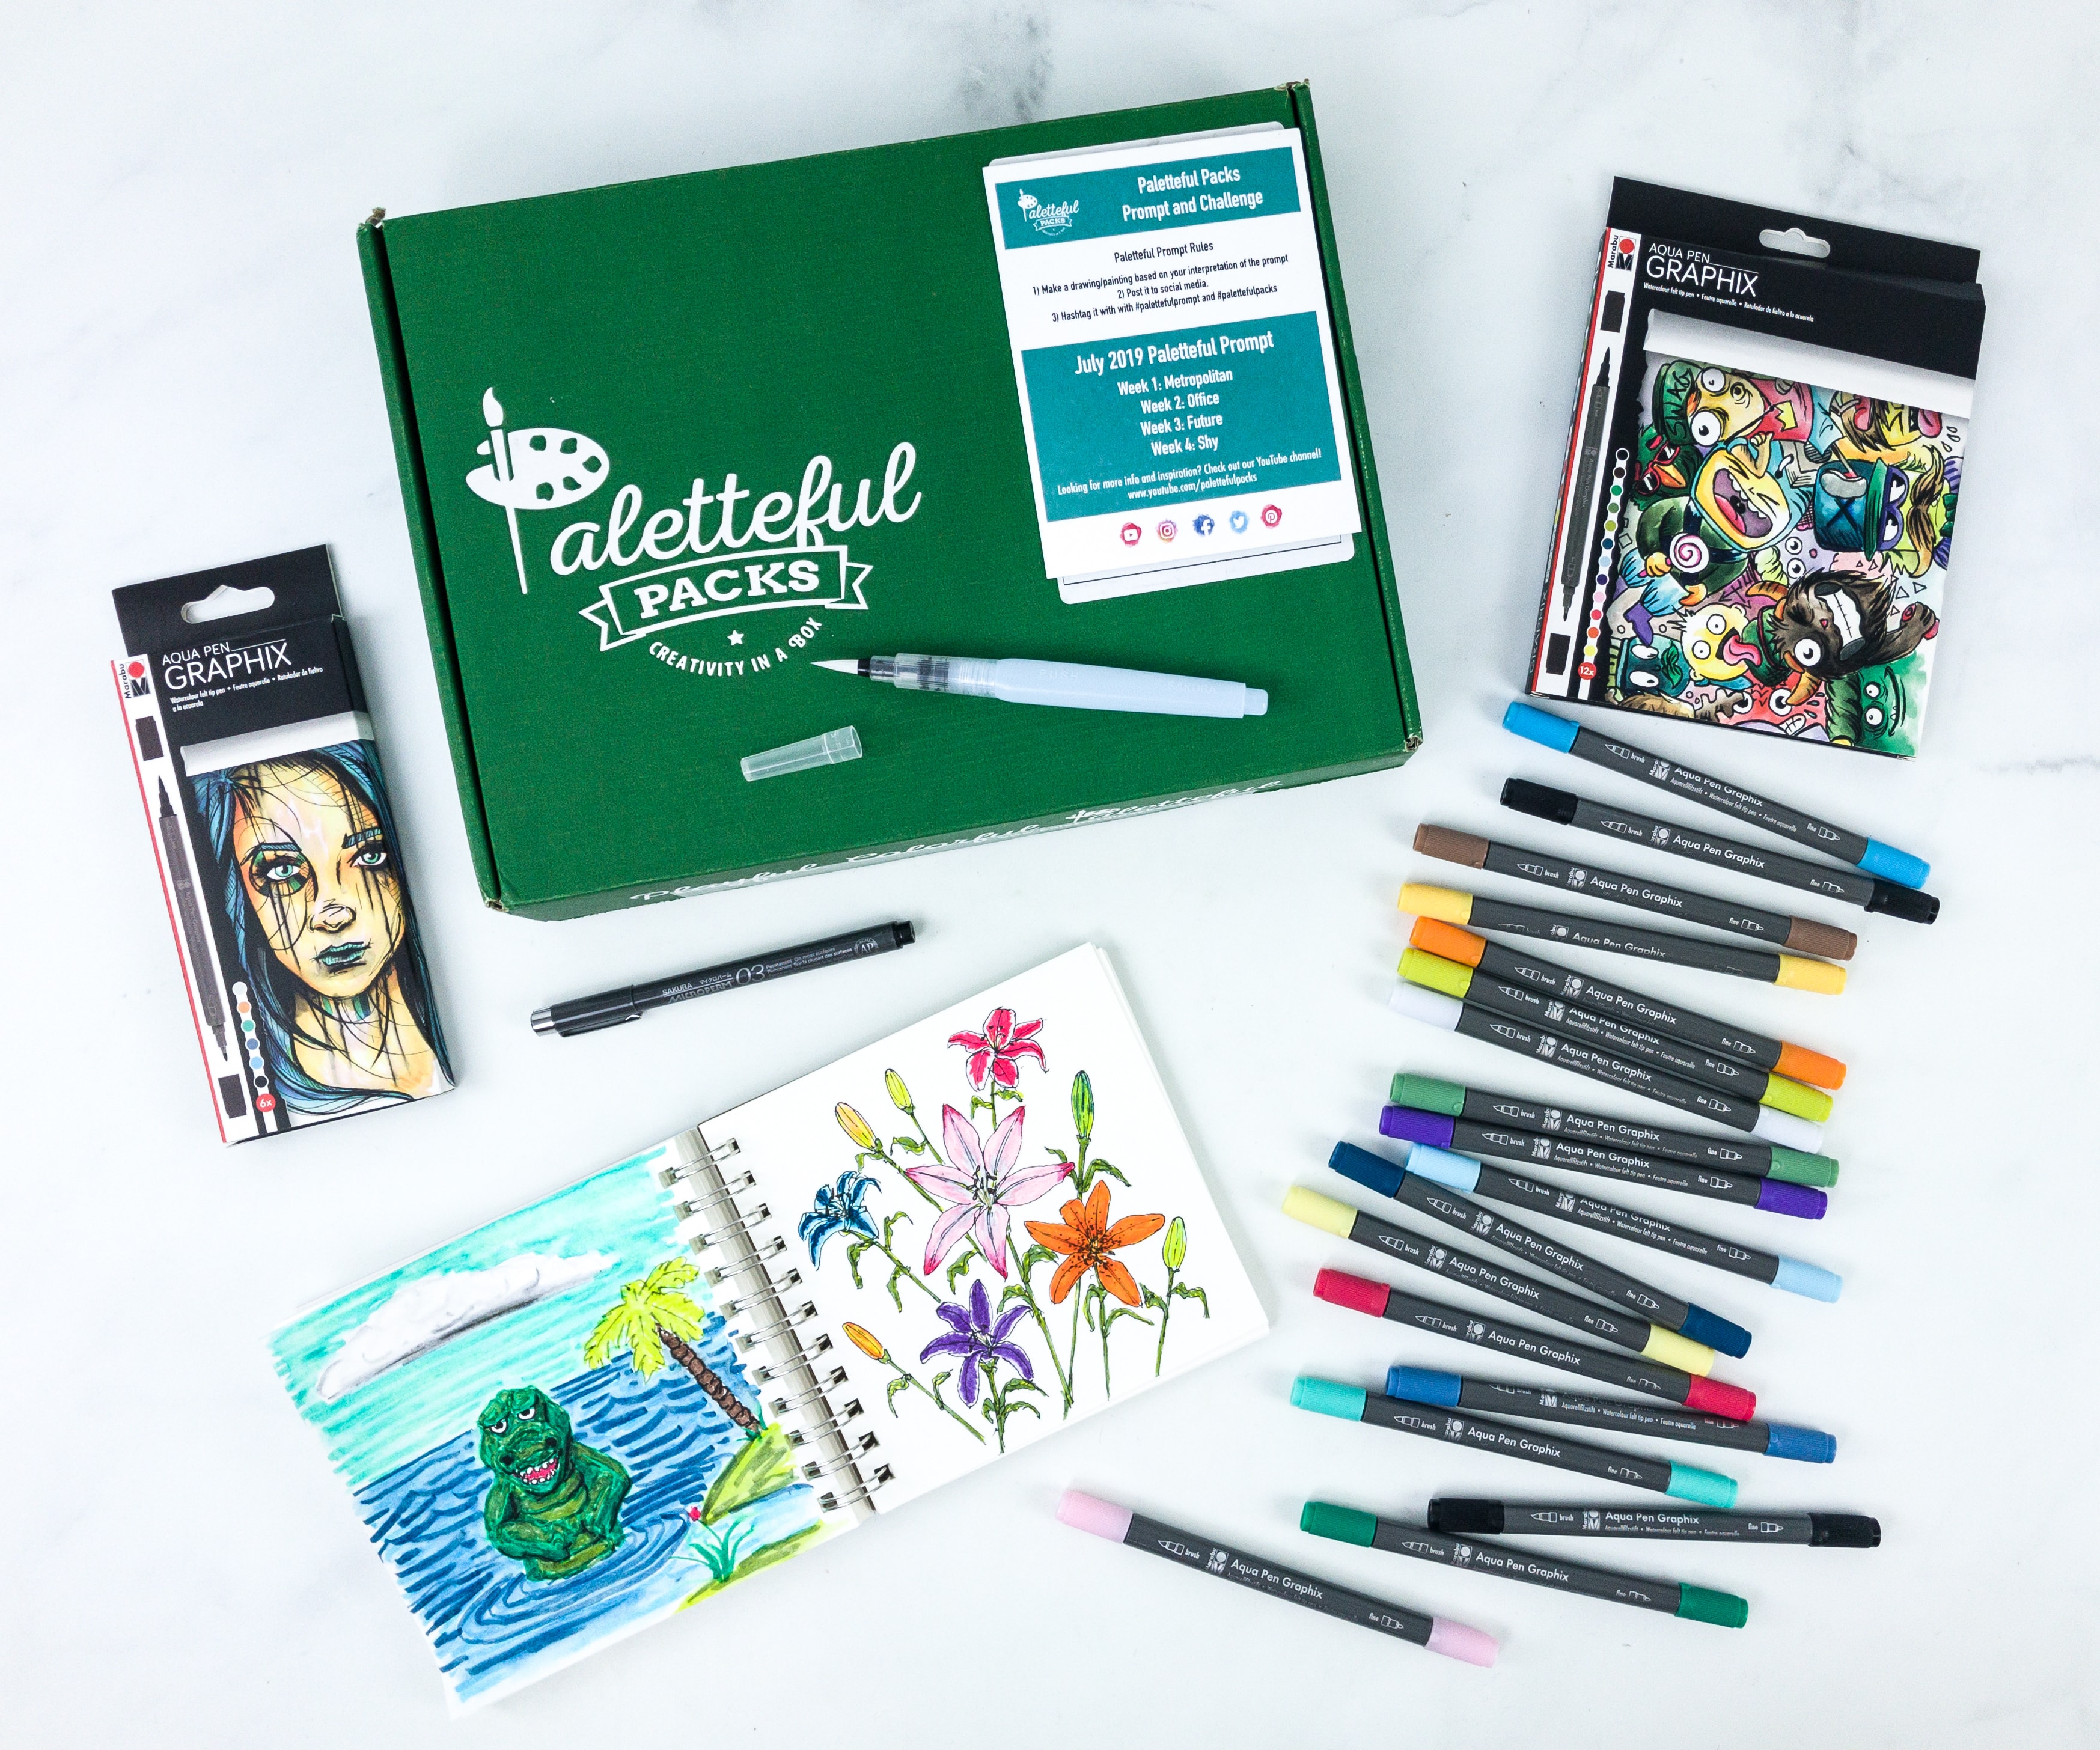 aquapens Water Brush Pens for Painting - 6 Pack - Water Drawing Brush Pens  with 6 Different nibs - Portable Watercolor Brush Pens for Artists - Water